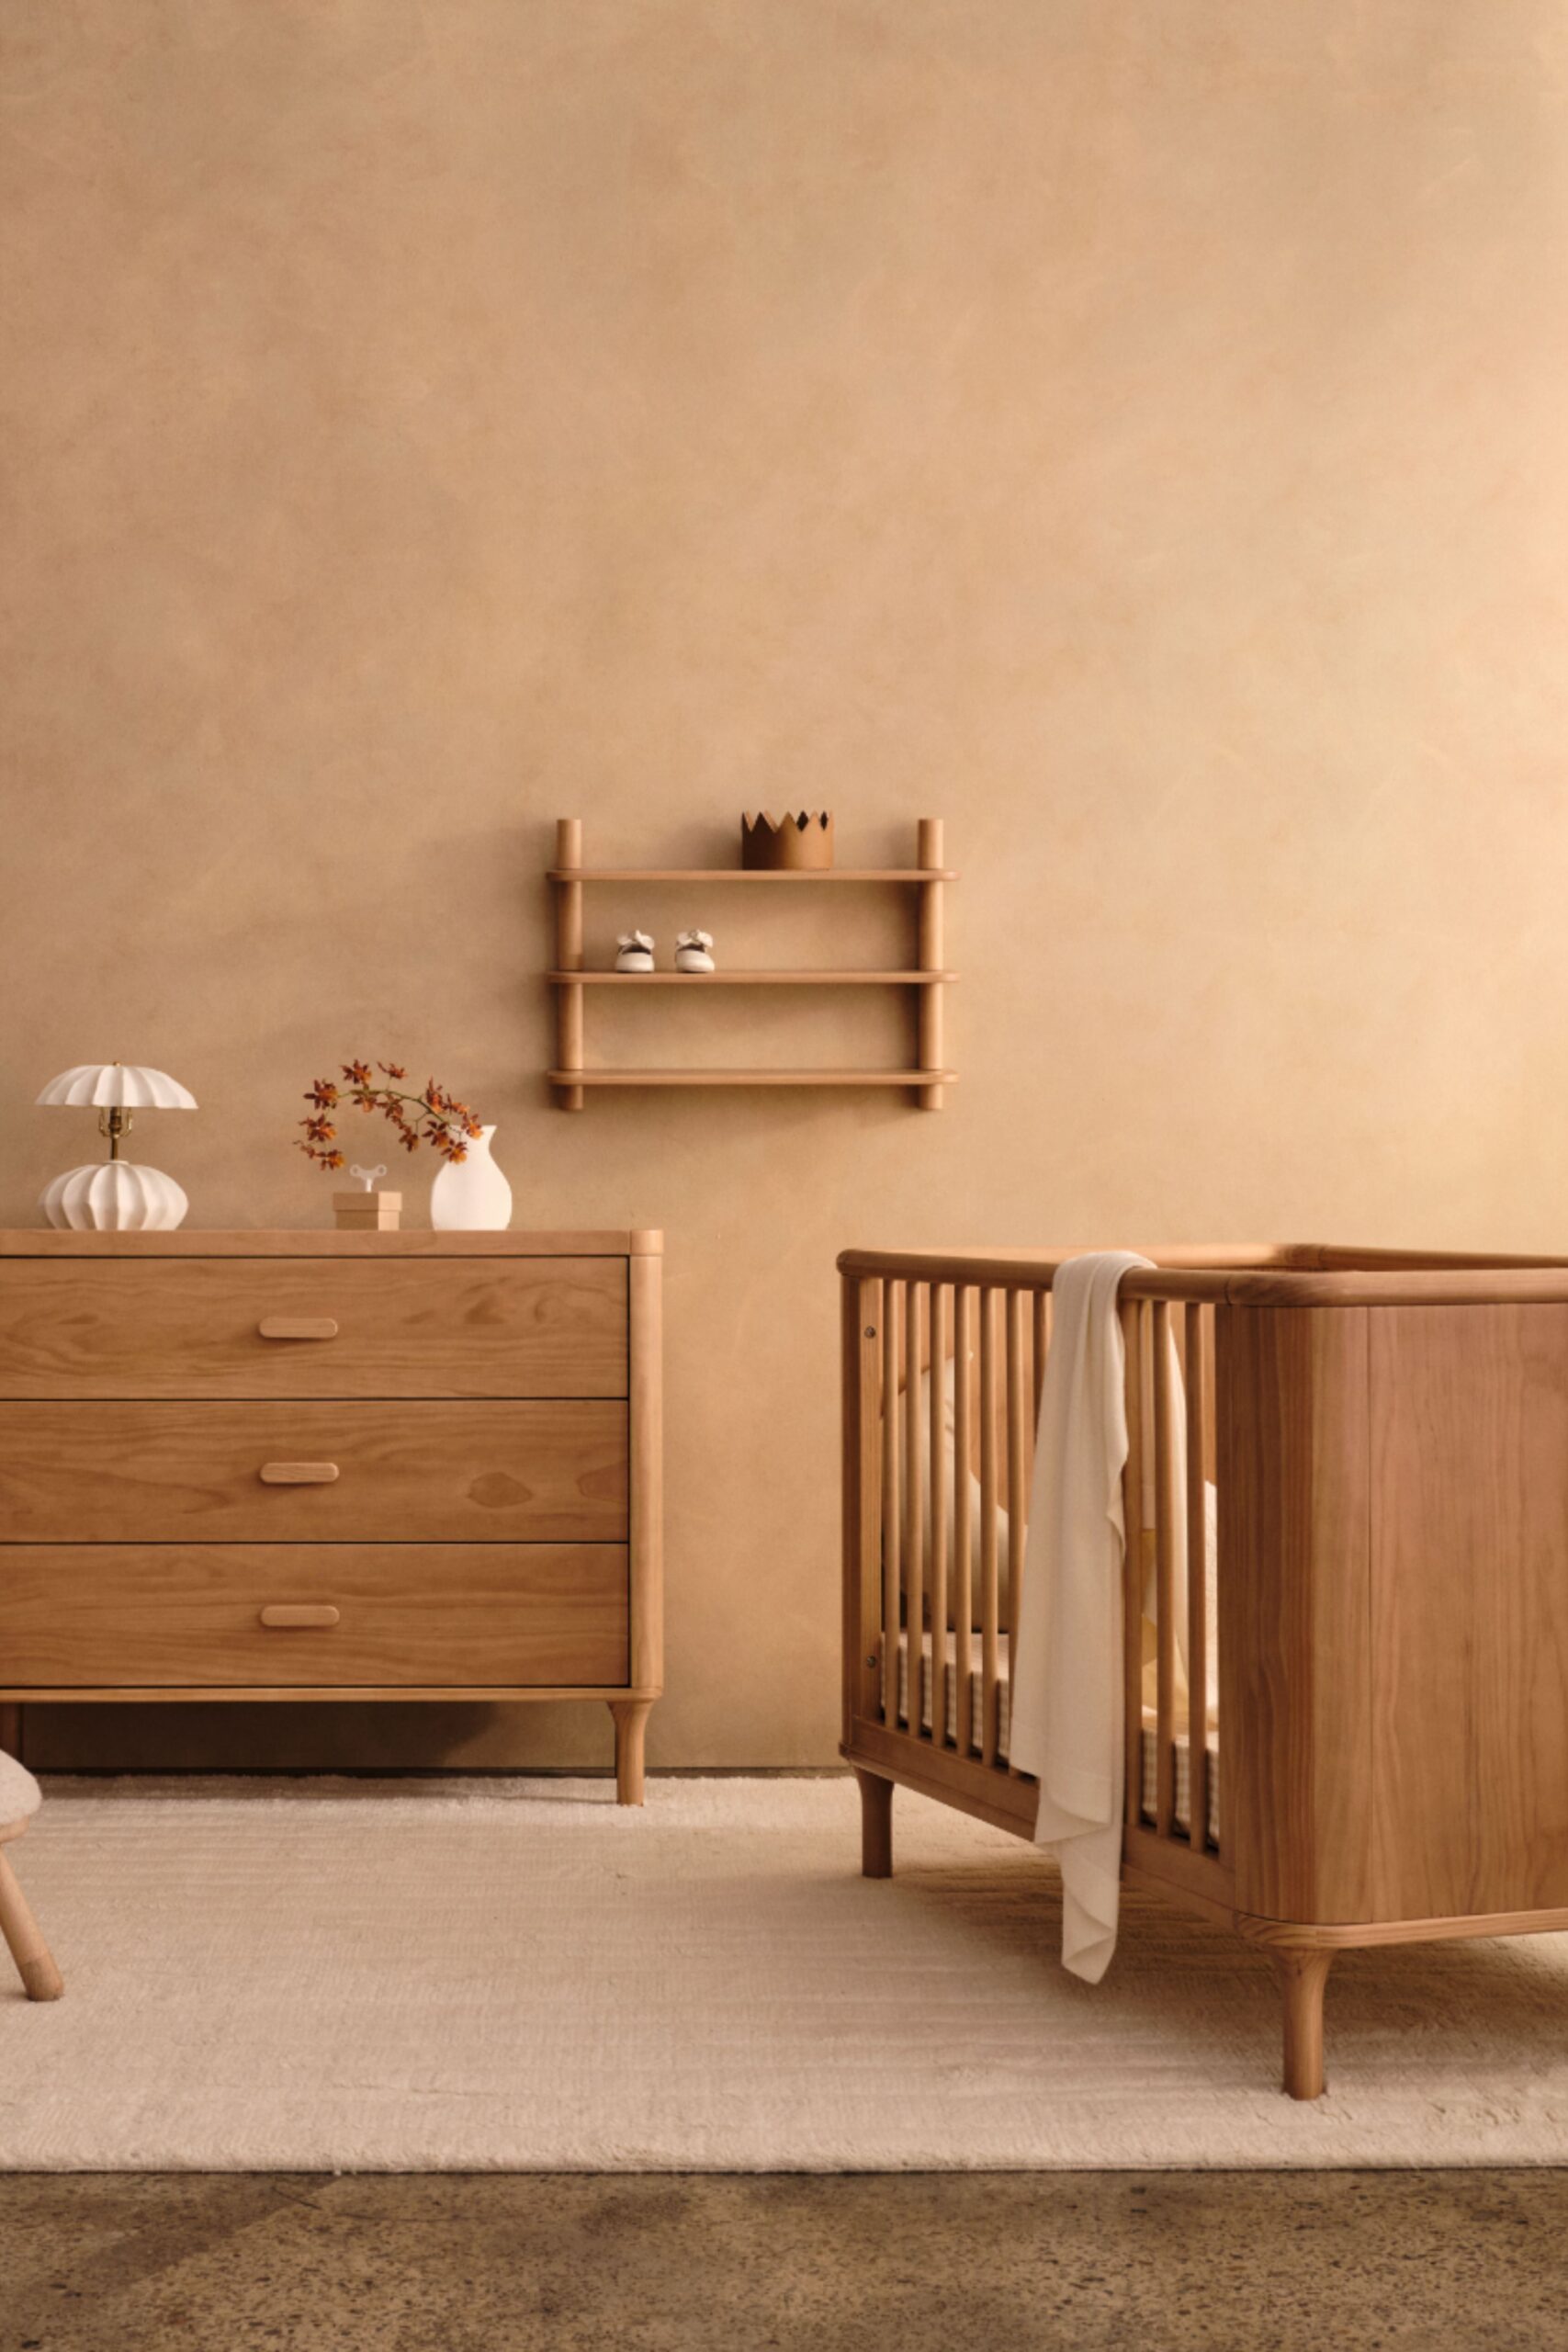 Nursery Sets Furnishing your Baby’s Room with Coordinated Décor items